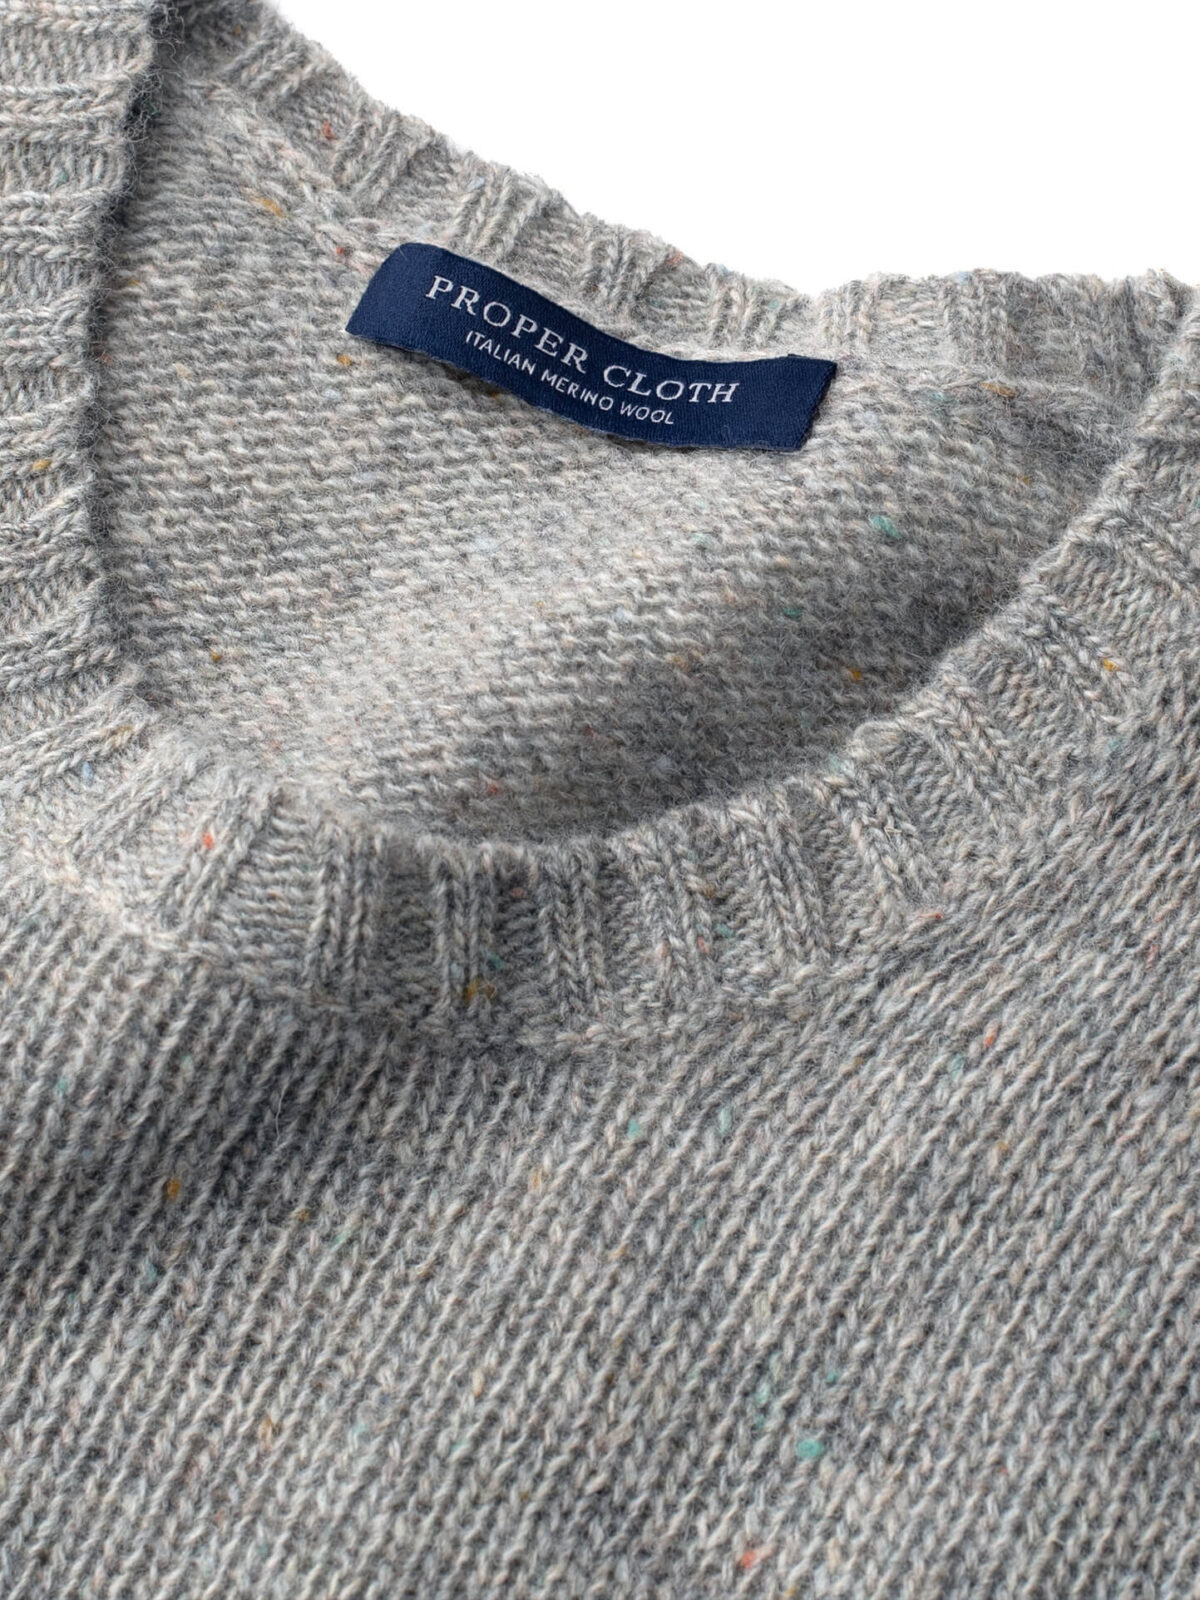 Fog Donegal Lambswool Sweater